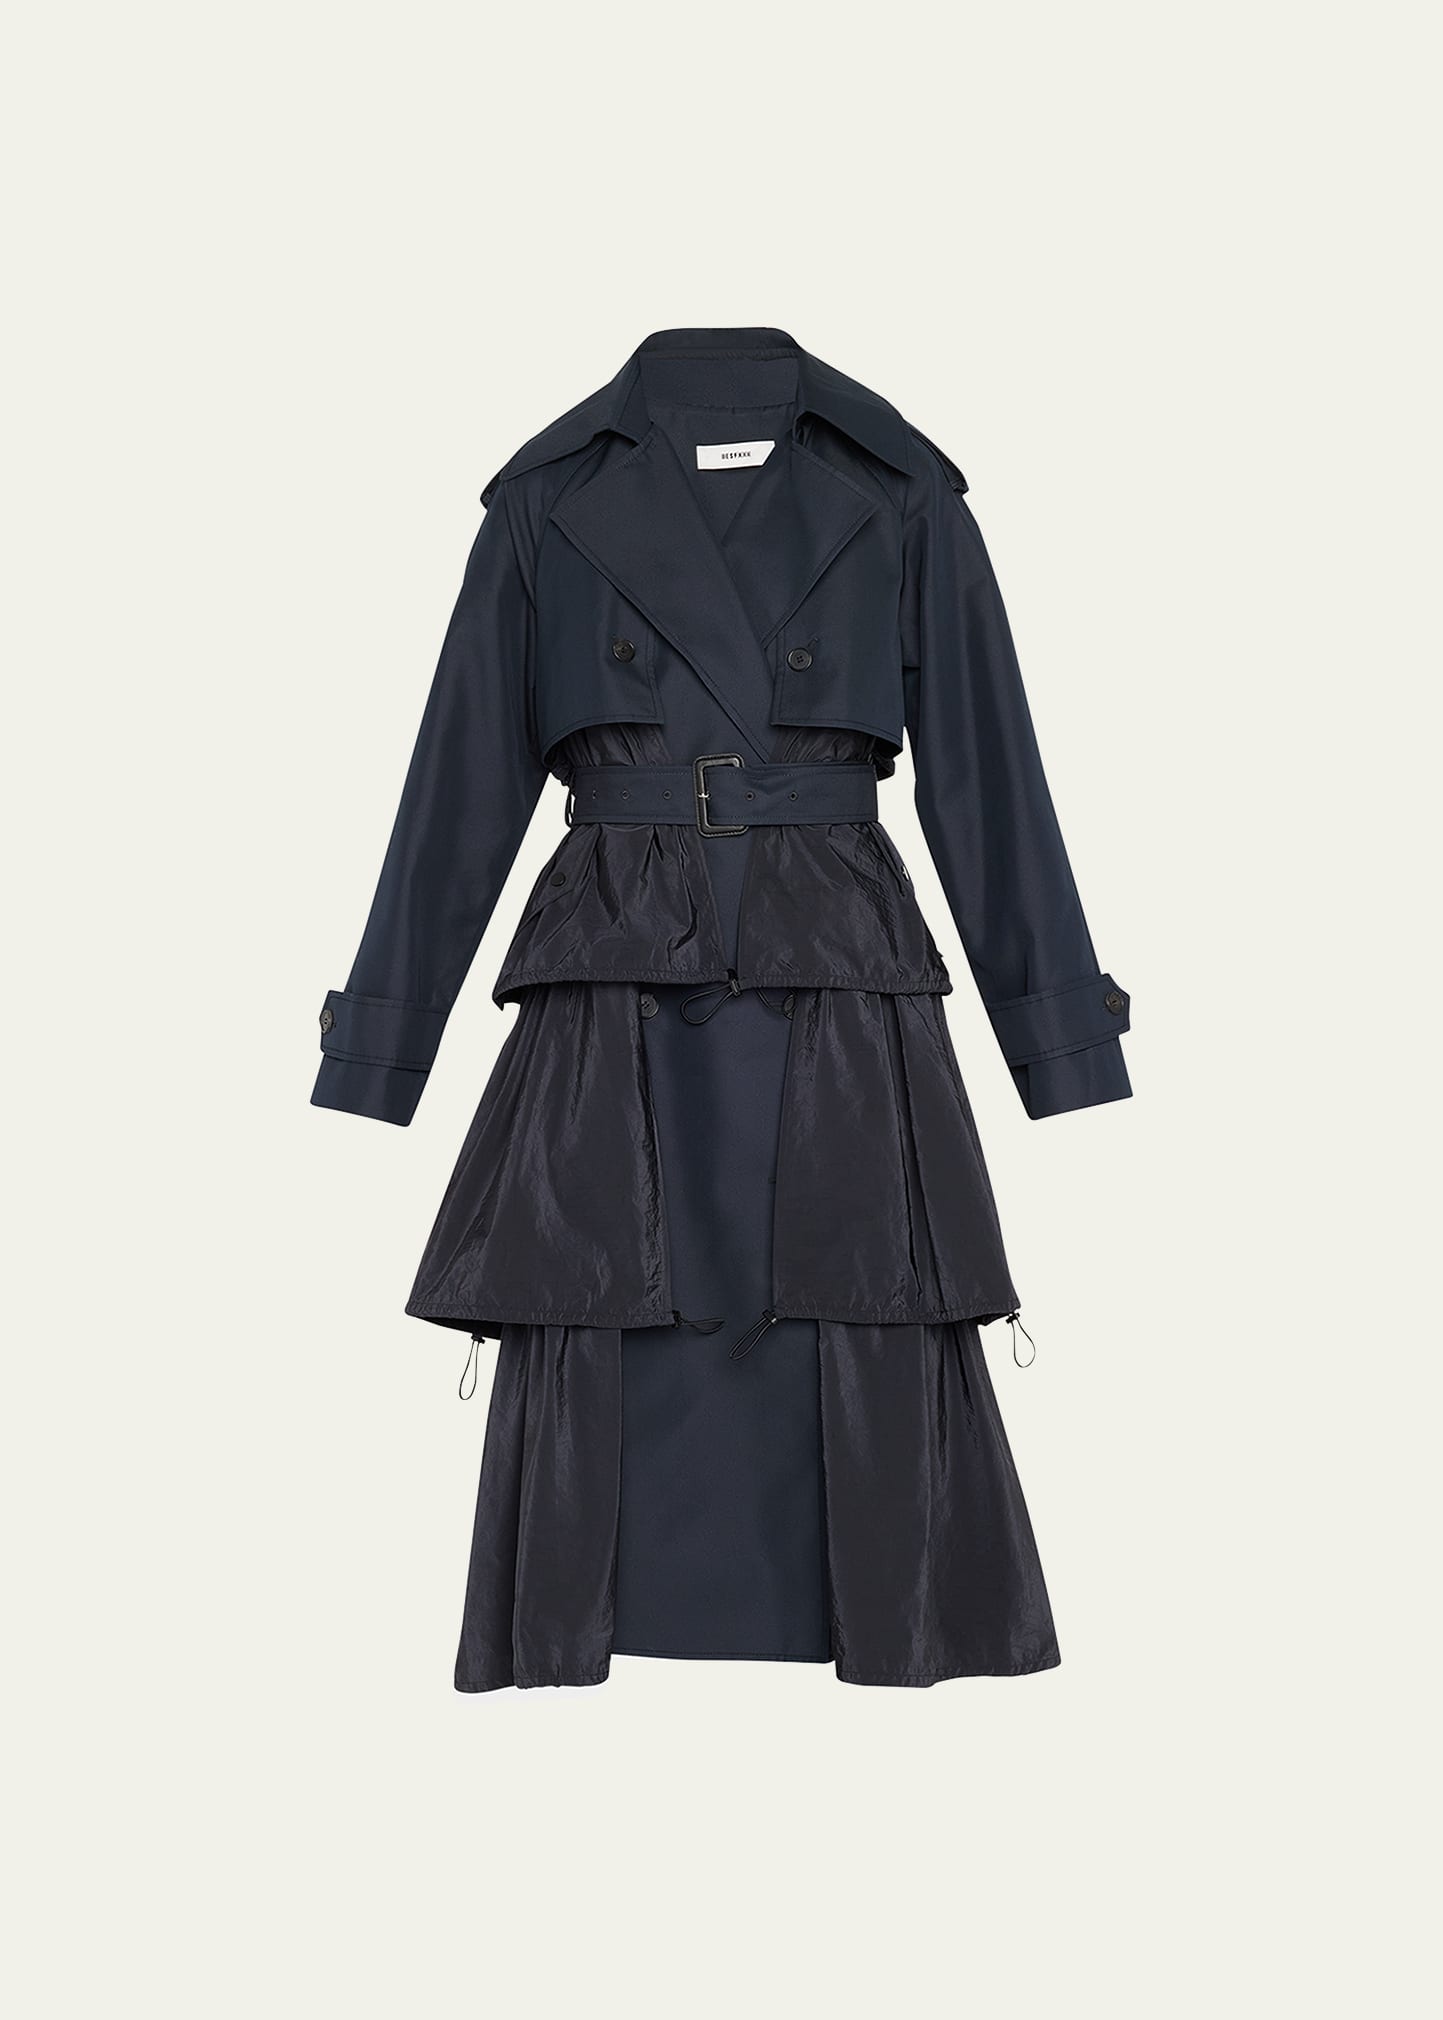 BESFXXK Tiered Ruffle Double-Breasted Trench Coat